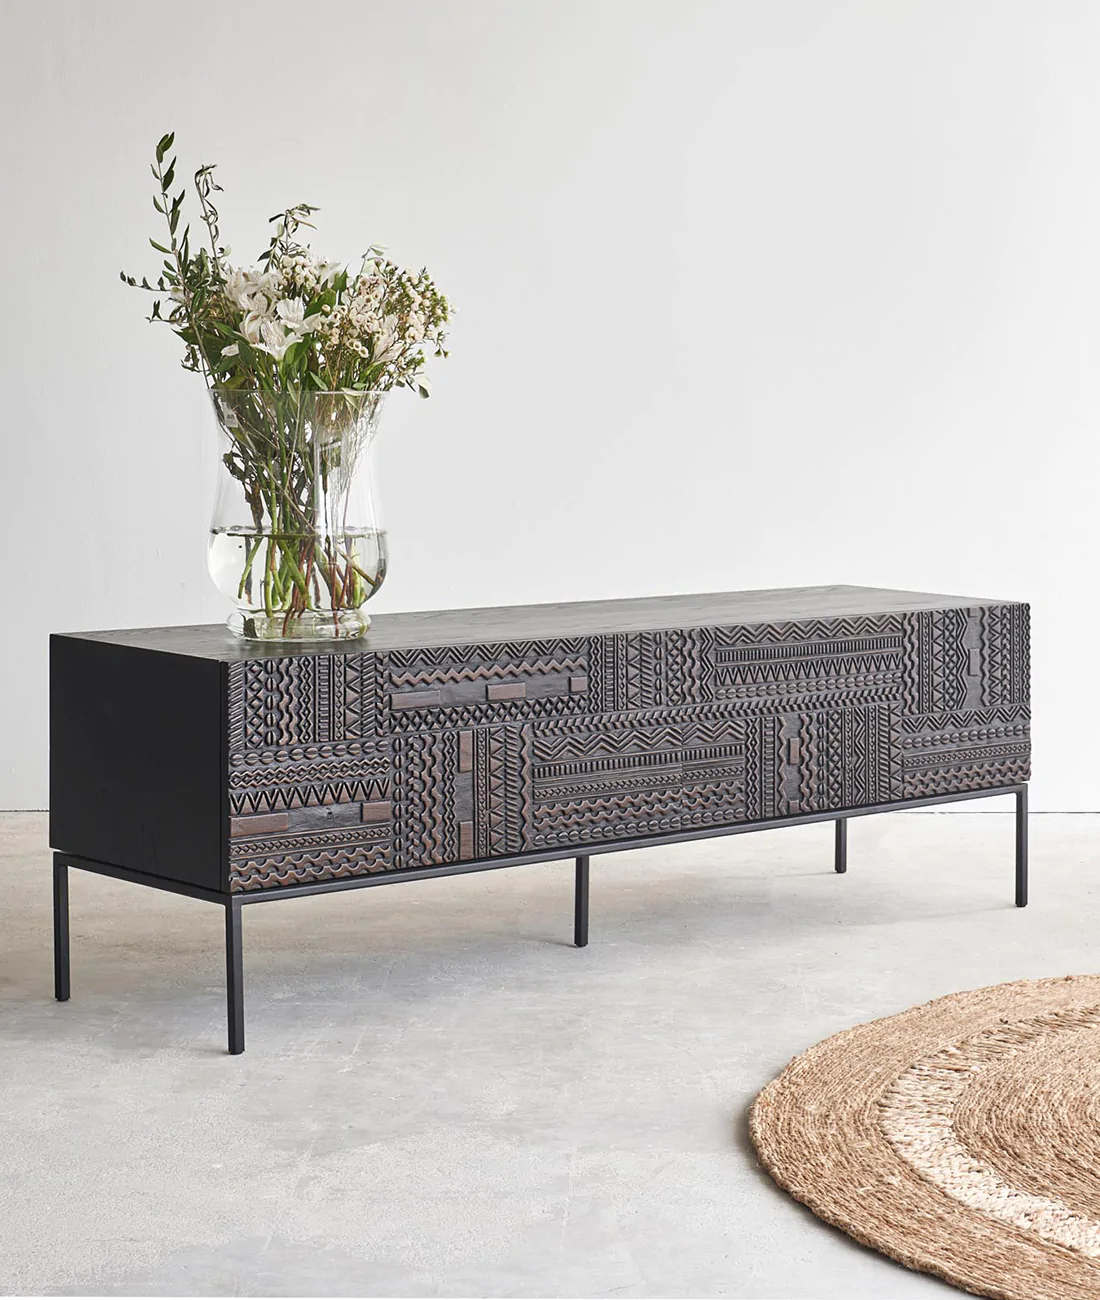 carved television stand and console table, planter placed on it, rug on floor